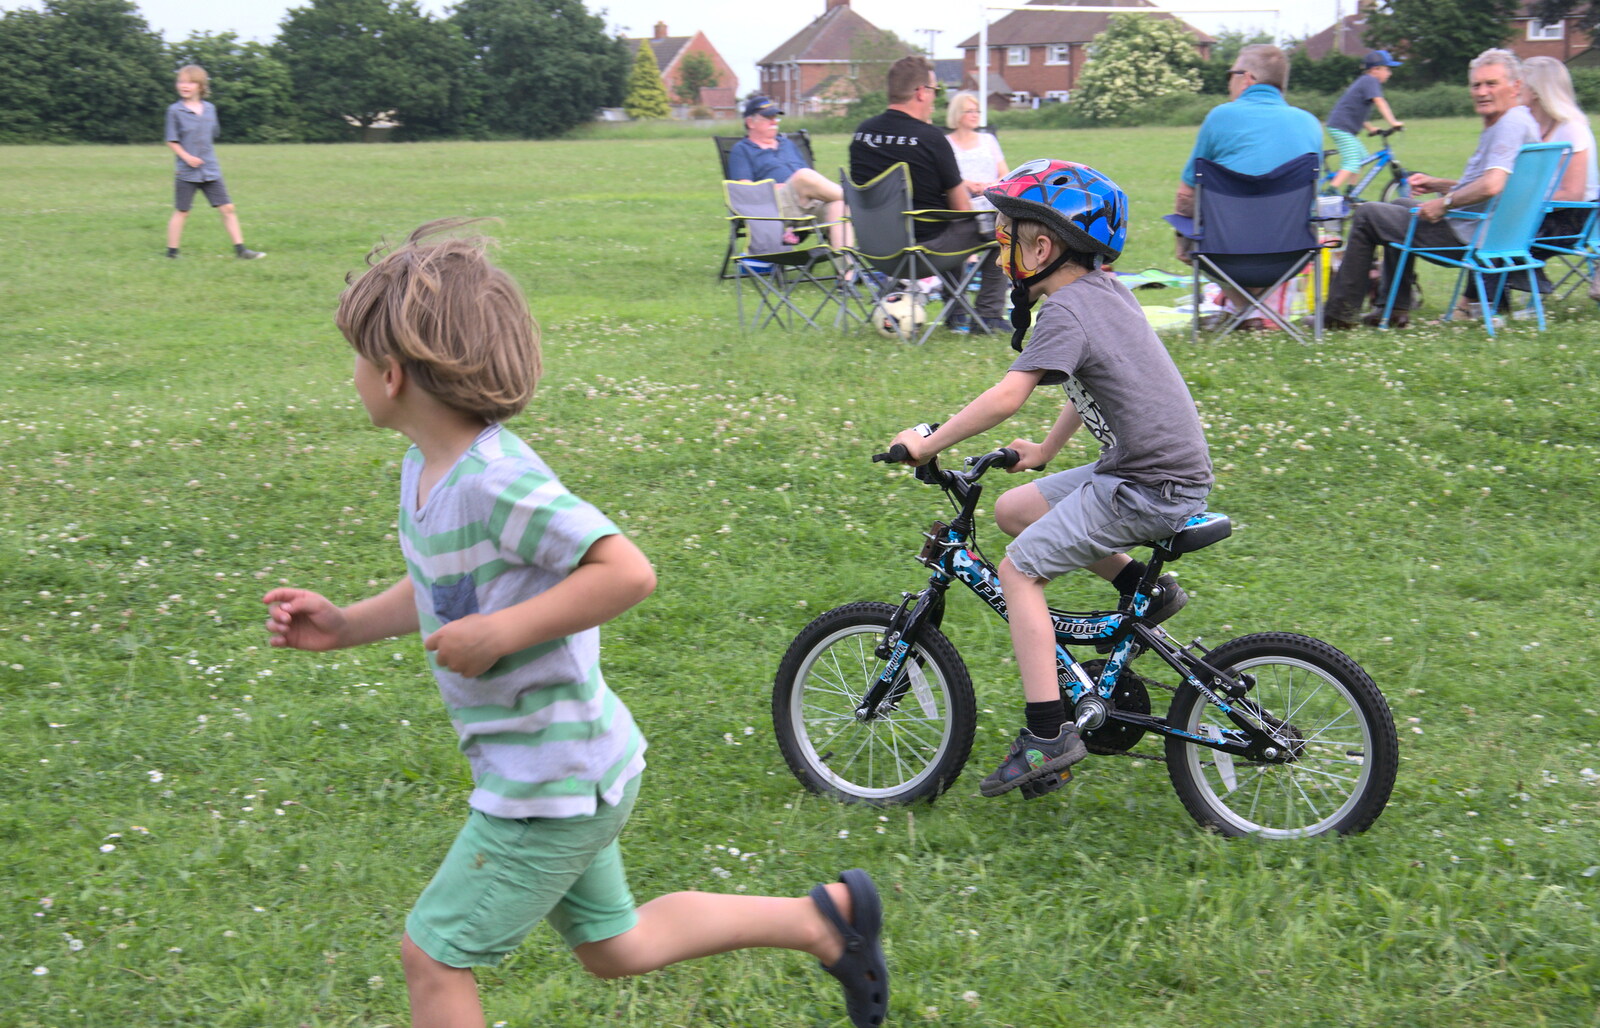 Thomas and Harry hurtle around from The Not-Opening of the Palgrave Playground, Palgrave, Suffolk - 3rd June 2018